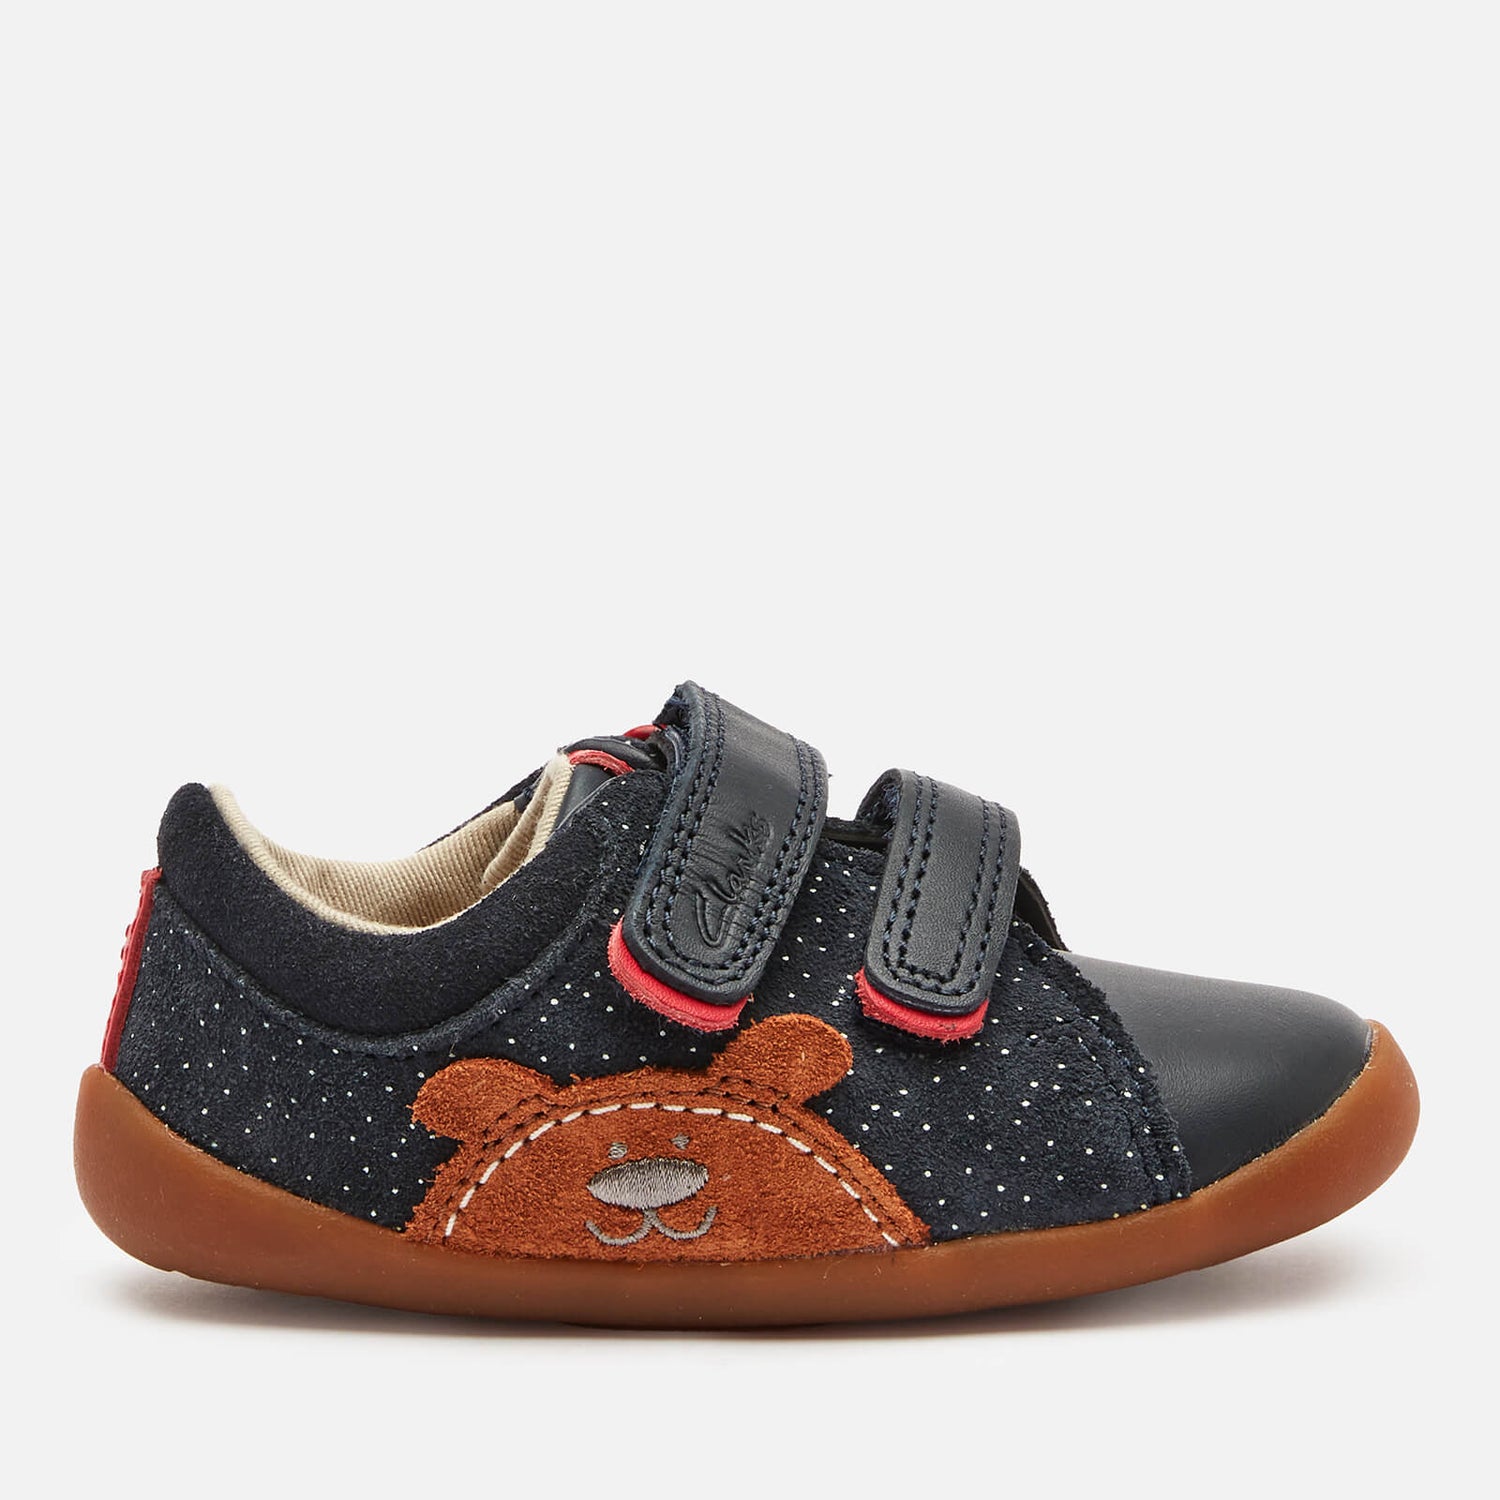 Clarks Toddlers Roamer Bear Shoes - Navy Suede - UK 2 Baby